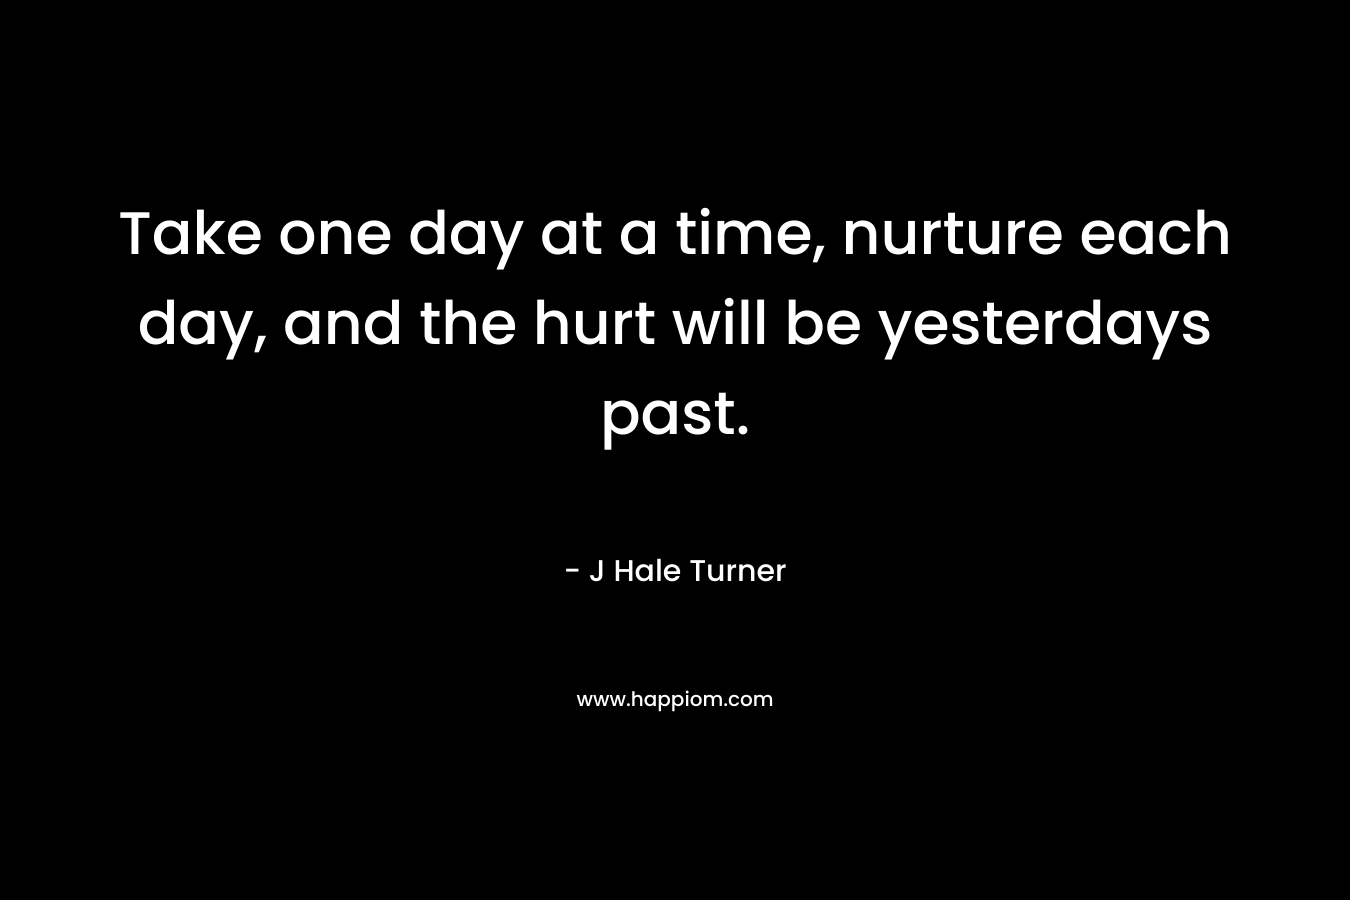 Take one day at a time, nurture each day, and the hurt will be yesterdays past.